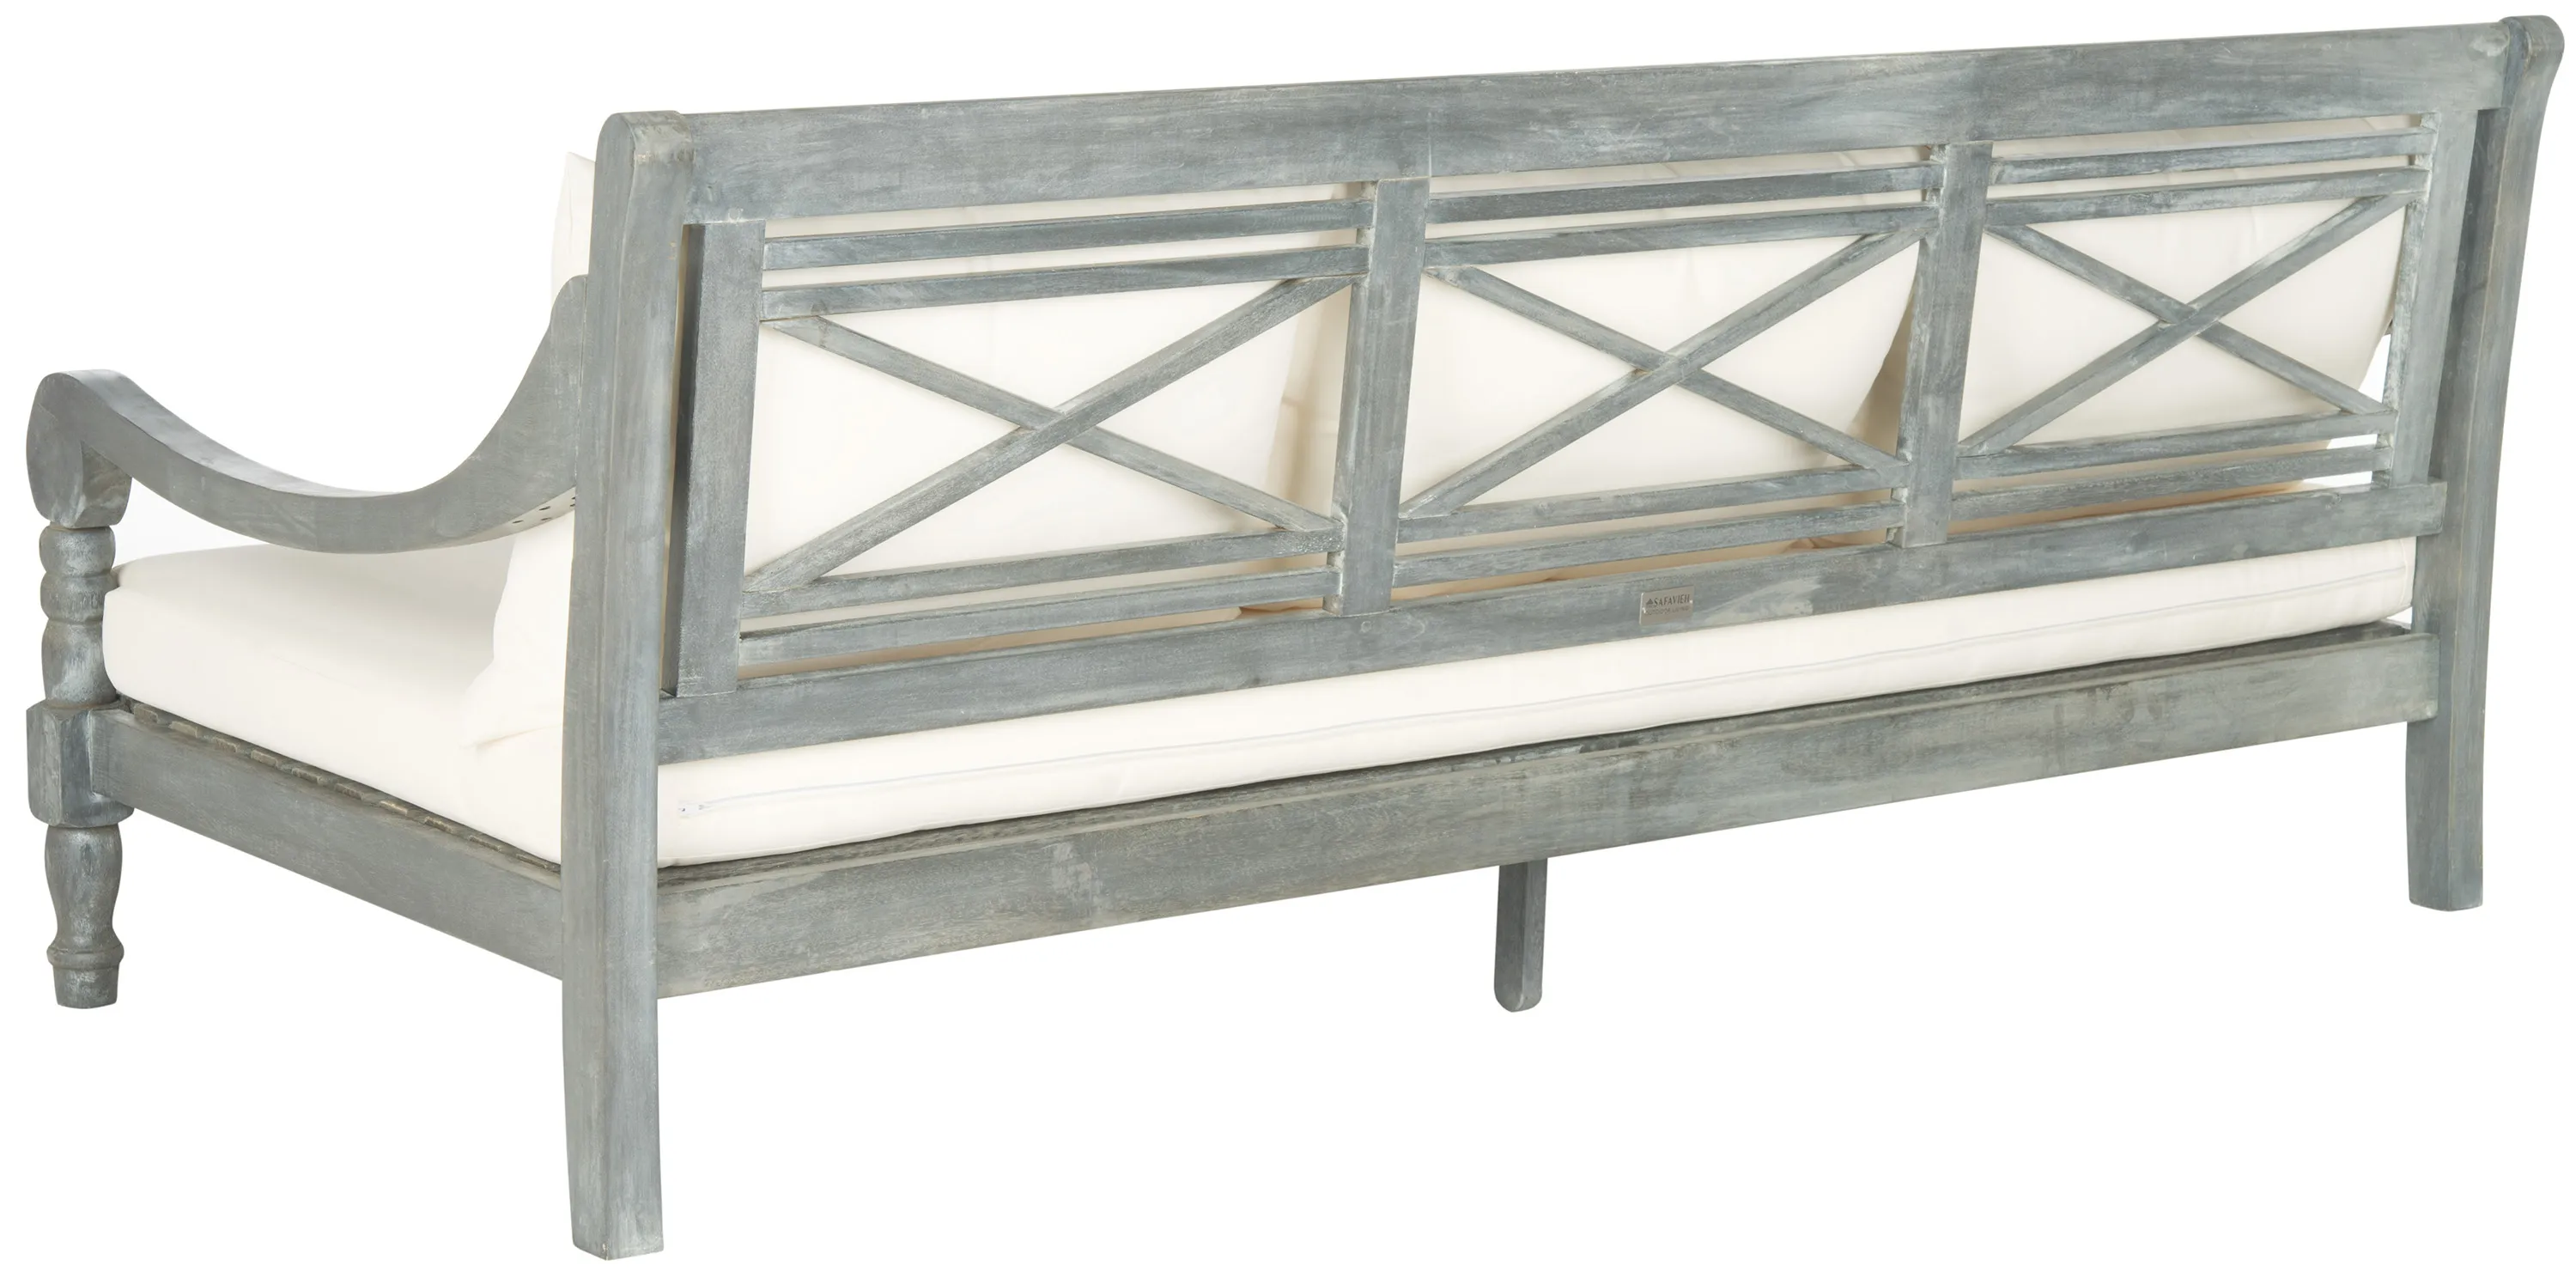 Newport 72" Outdoor Daybed - Gray/White - Beige - Comfortable, Sturdy